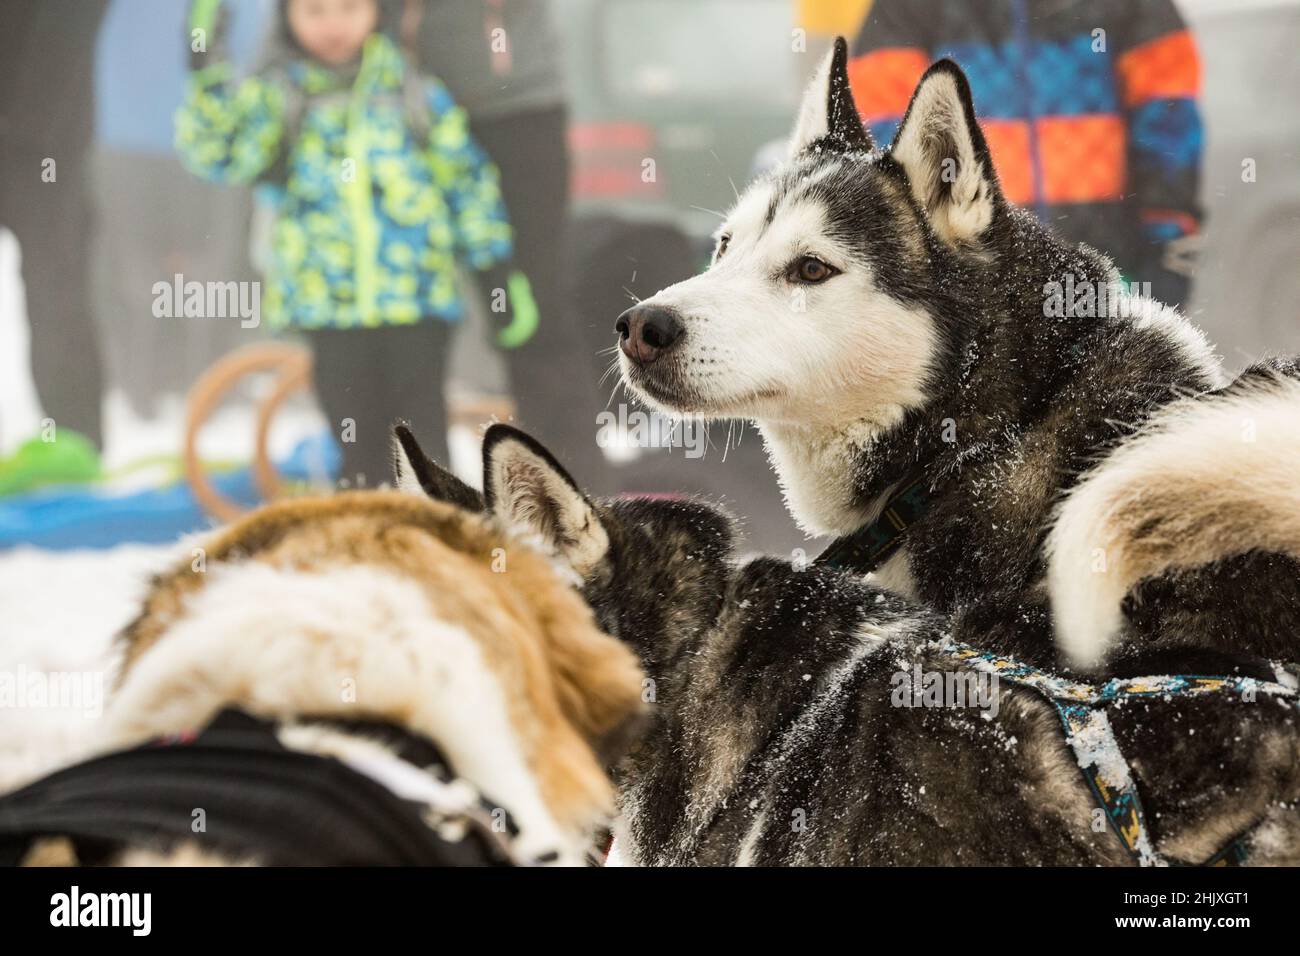 Czech mountain dog, close-up portrait of a frozen dog. Feeding a dog in winter. Hoarfrost on the dog's mustache. Winter sled dog races. Stock Photo